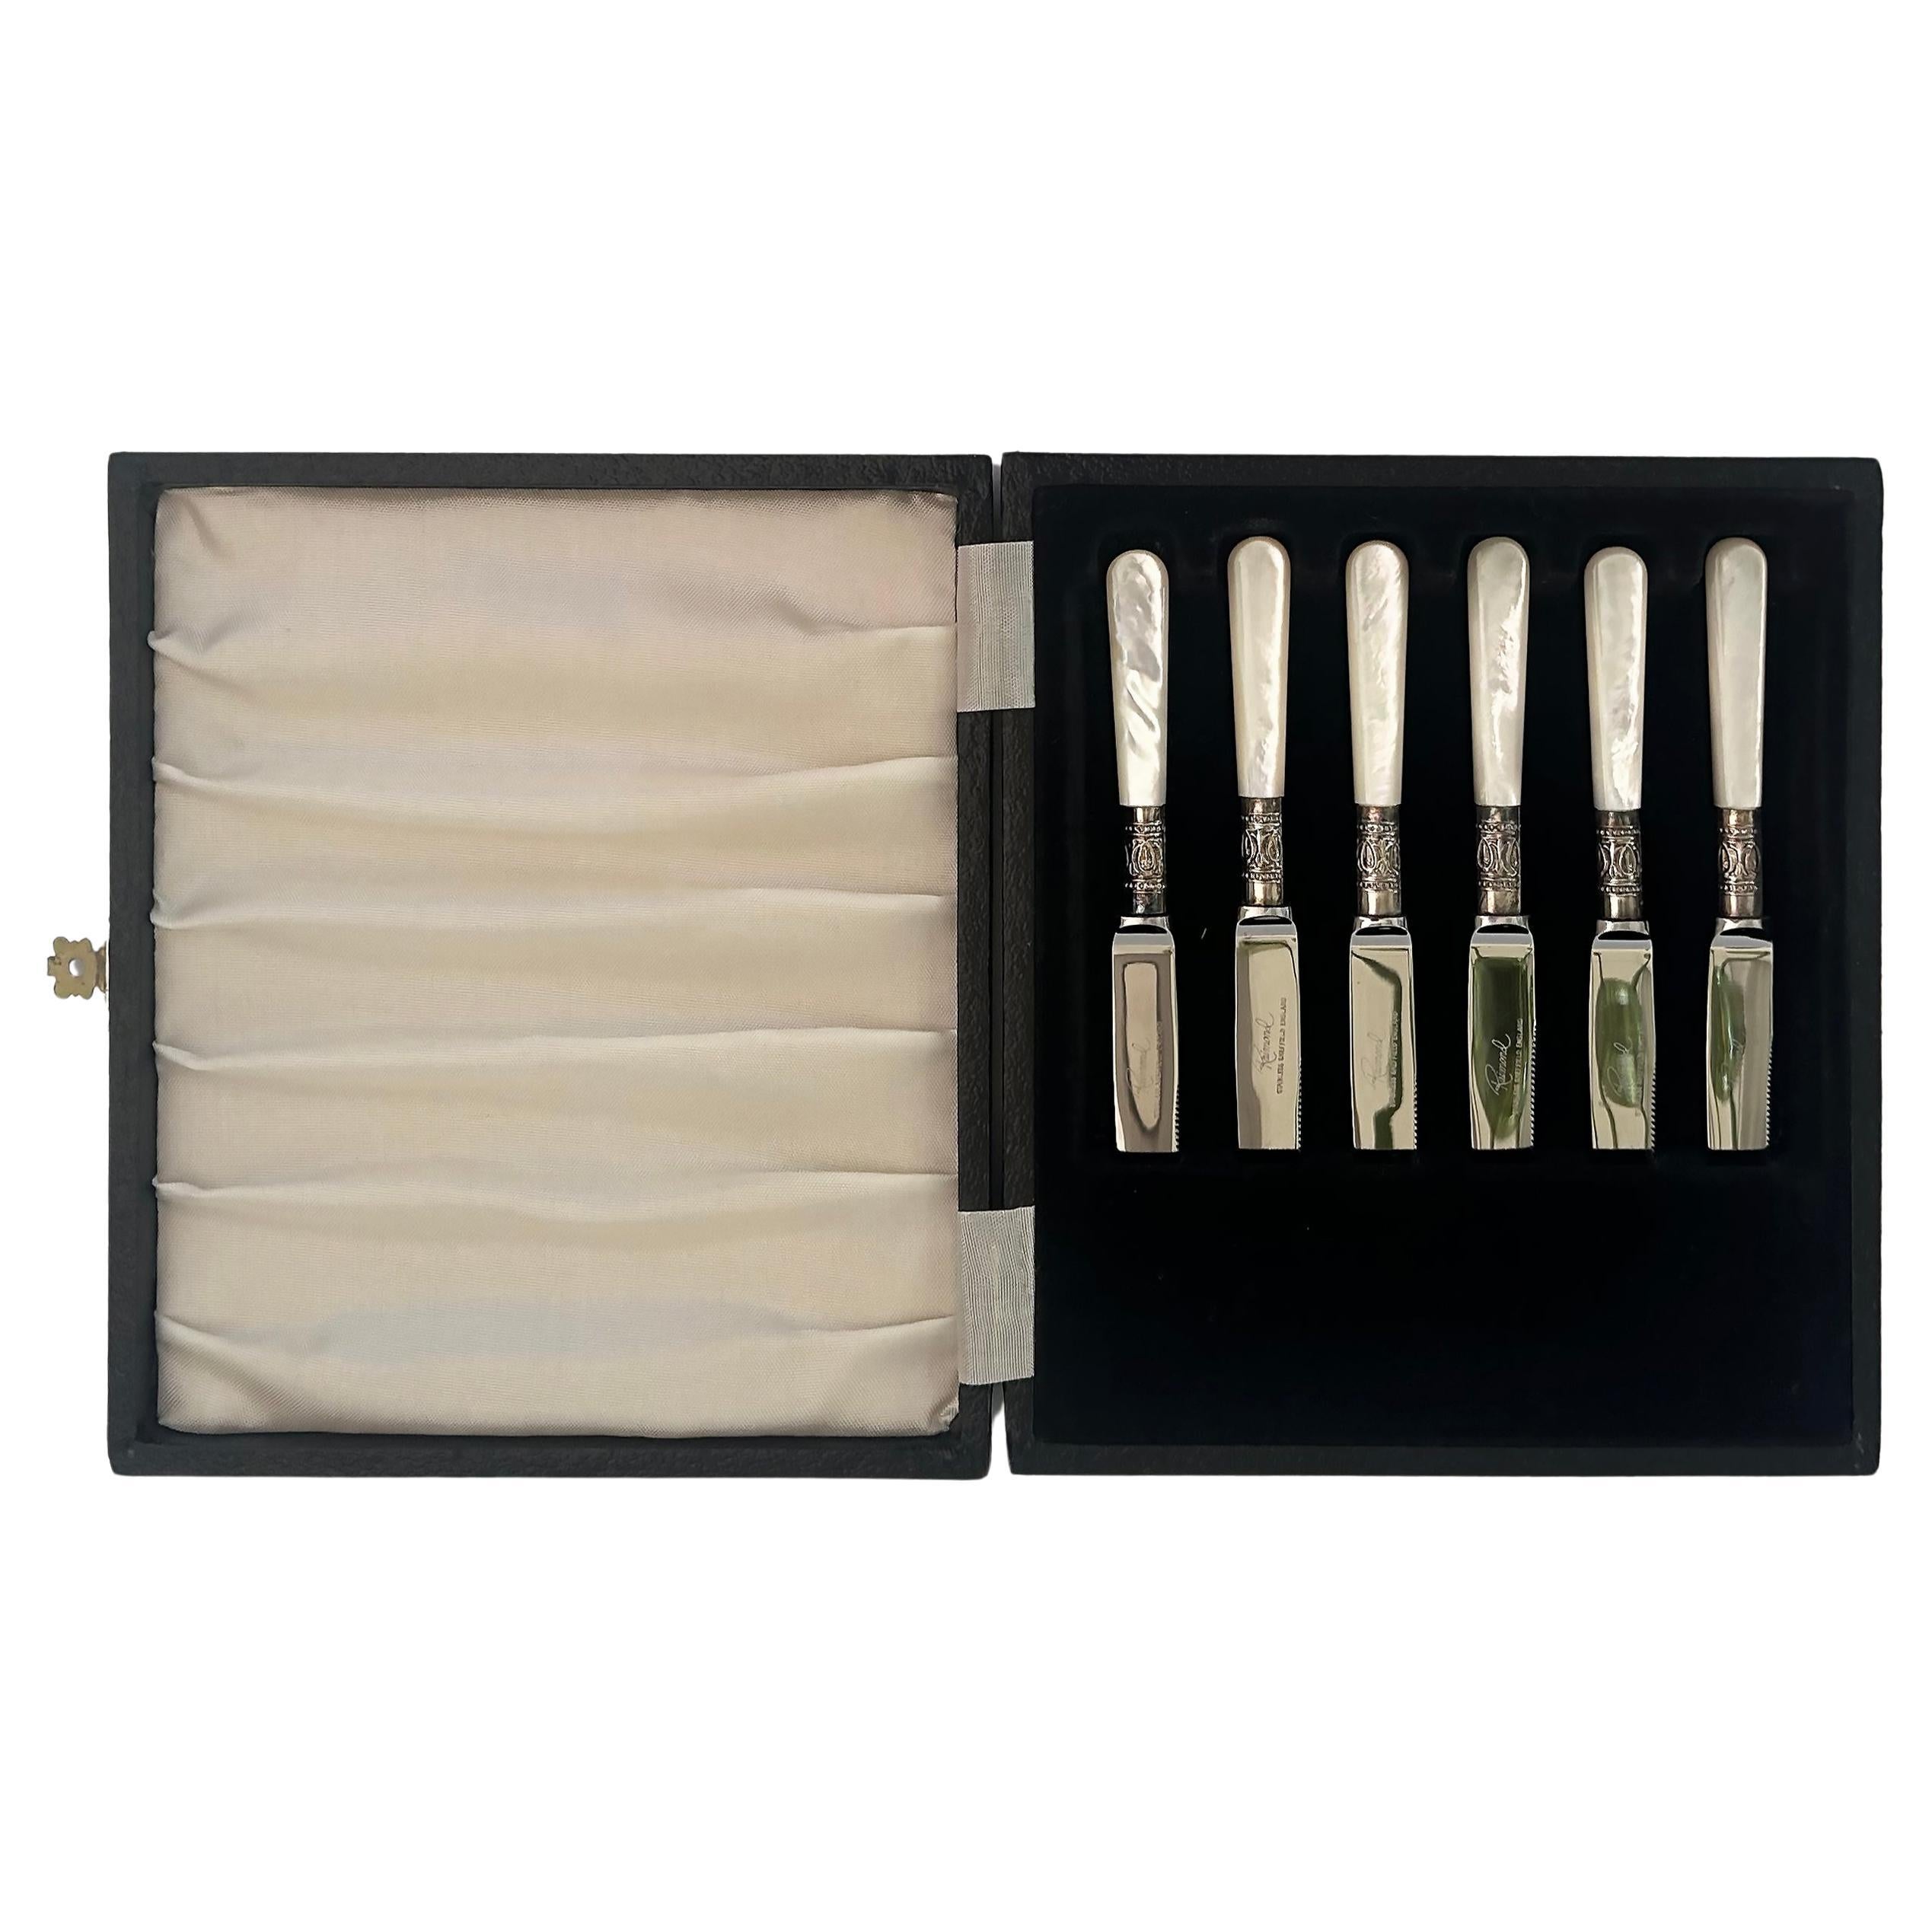 Vintage Raimond Sheffield England Mother-of-Pearl Fruit Knives Silver Plated Set For Sale